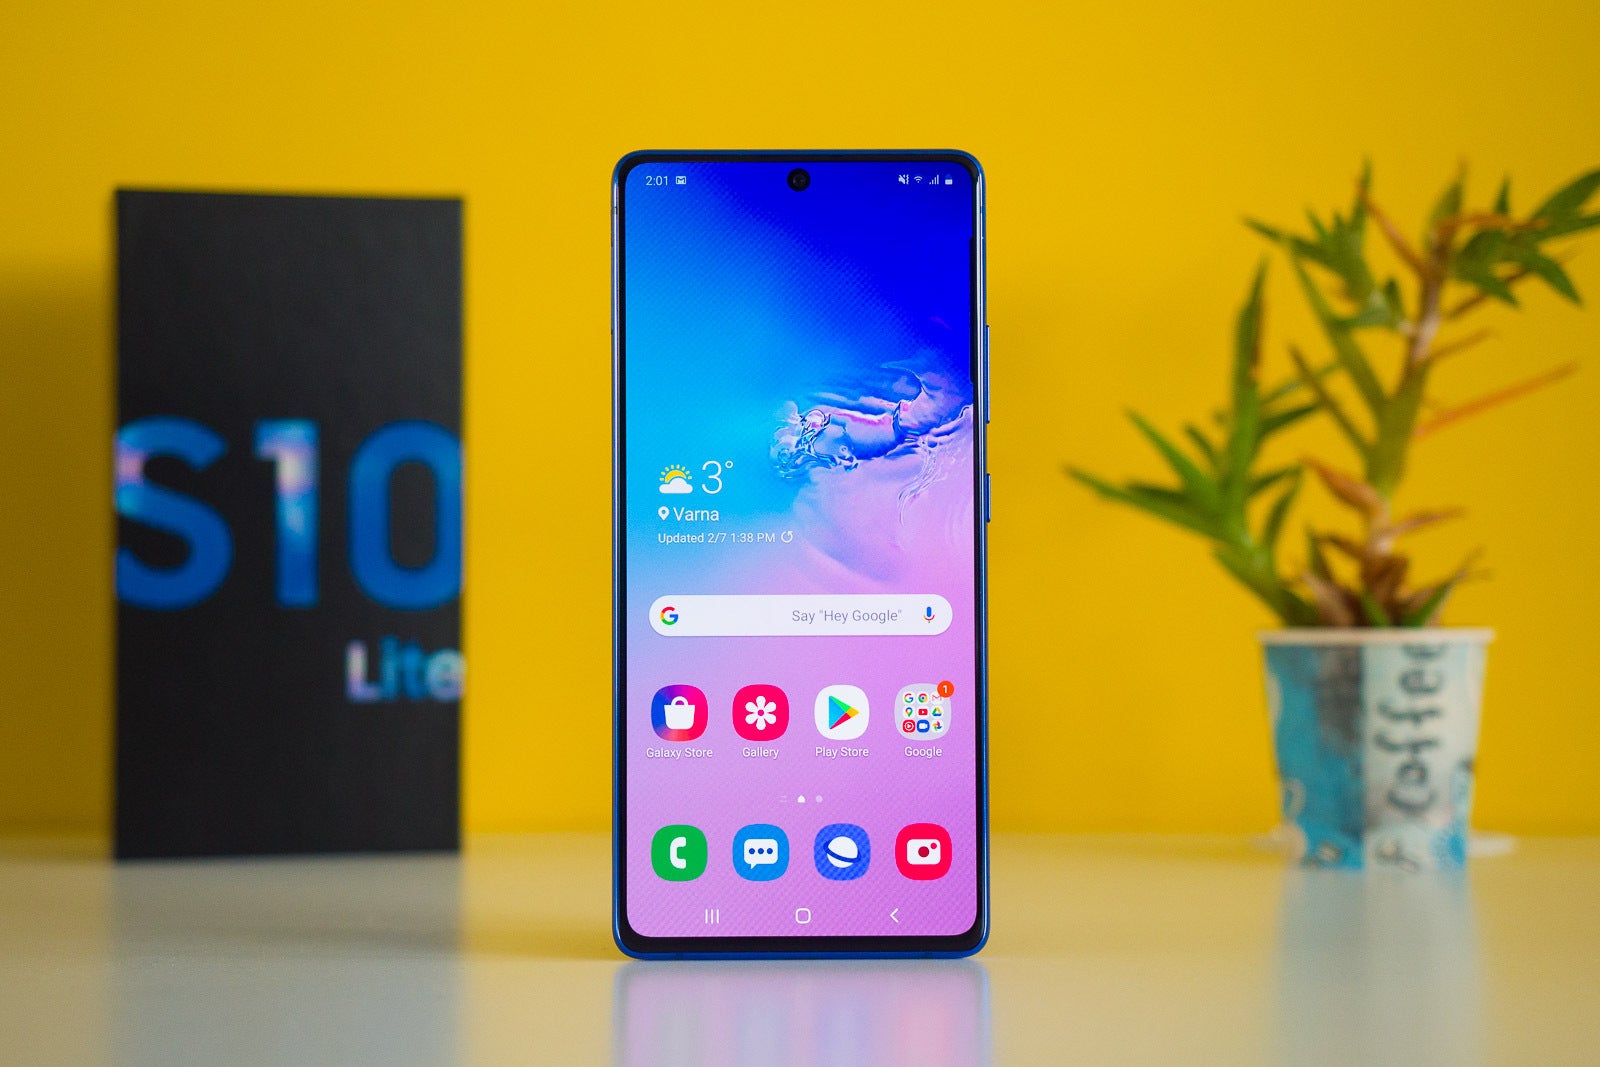 Deal: save £150 on the new Galaxy S10 Lite at O2 UK